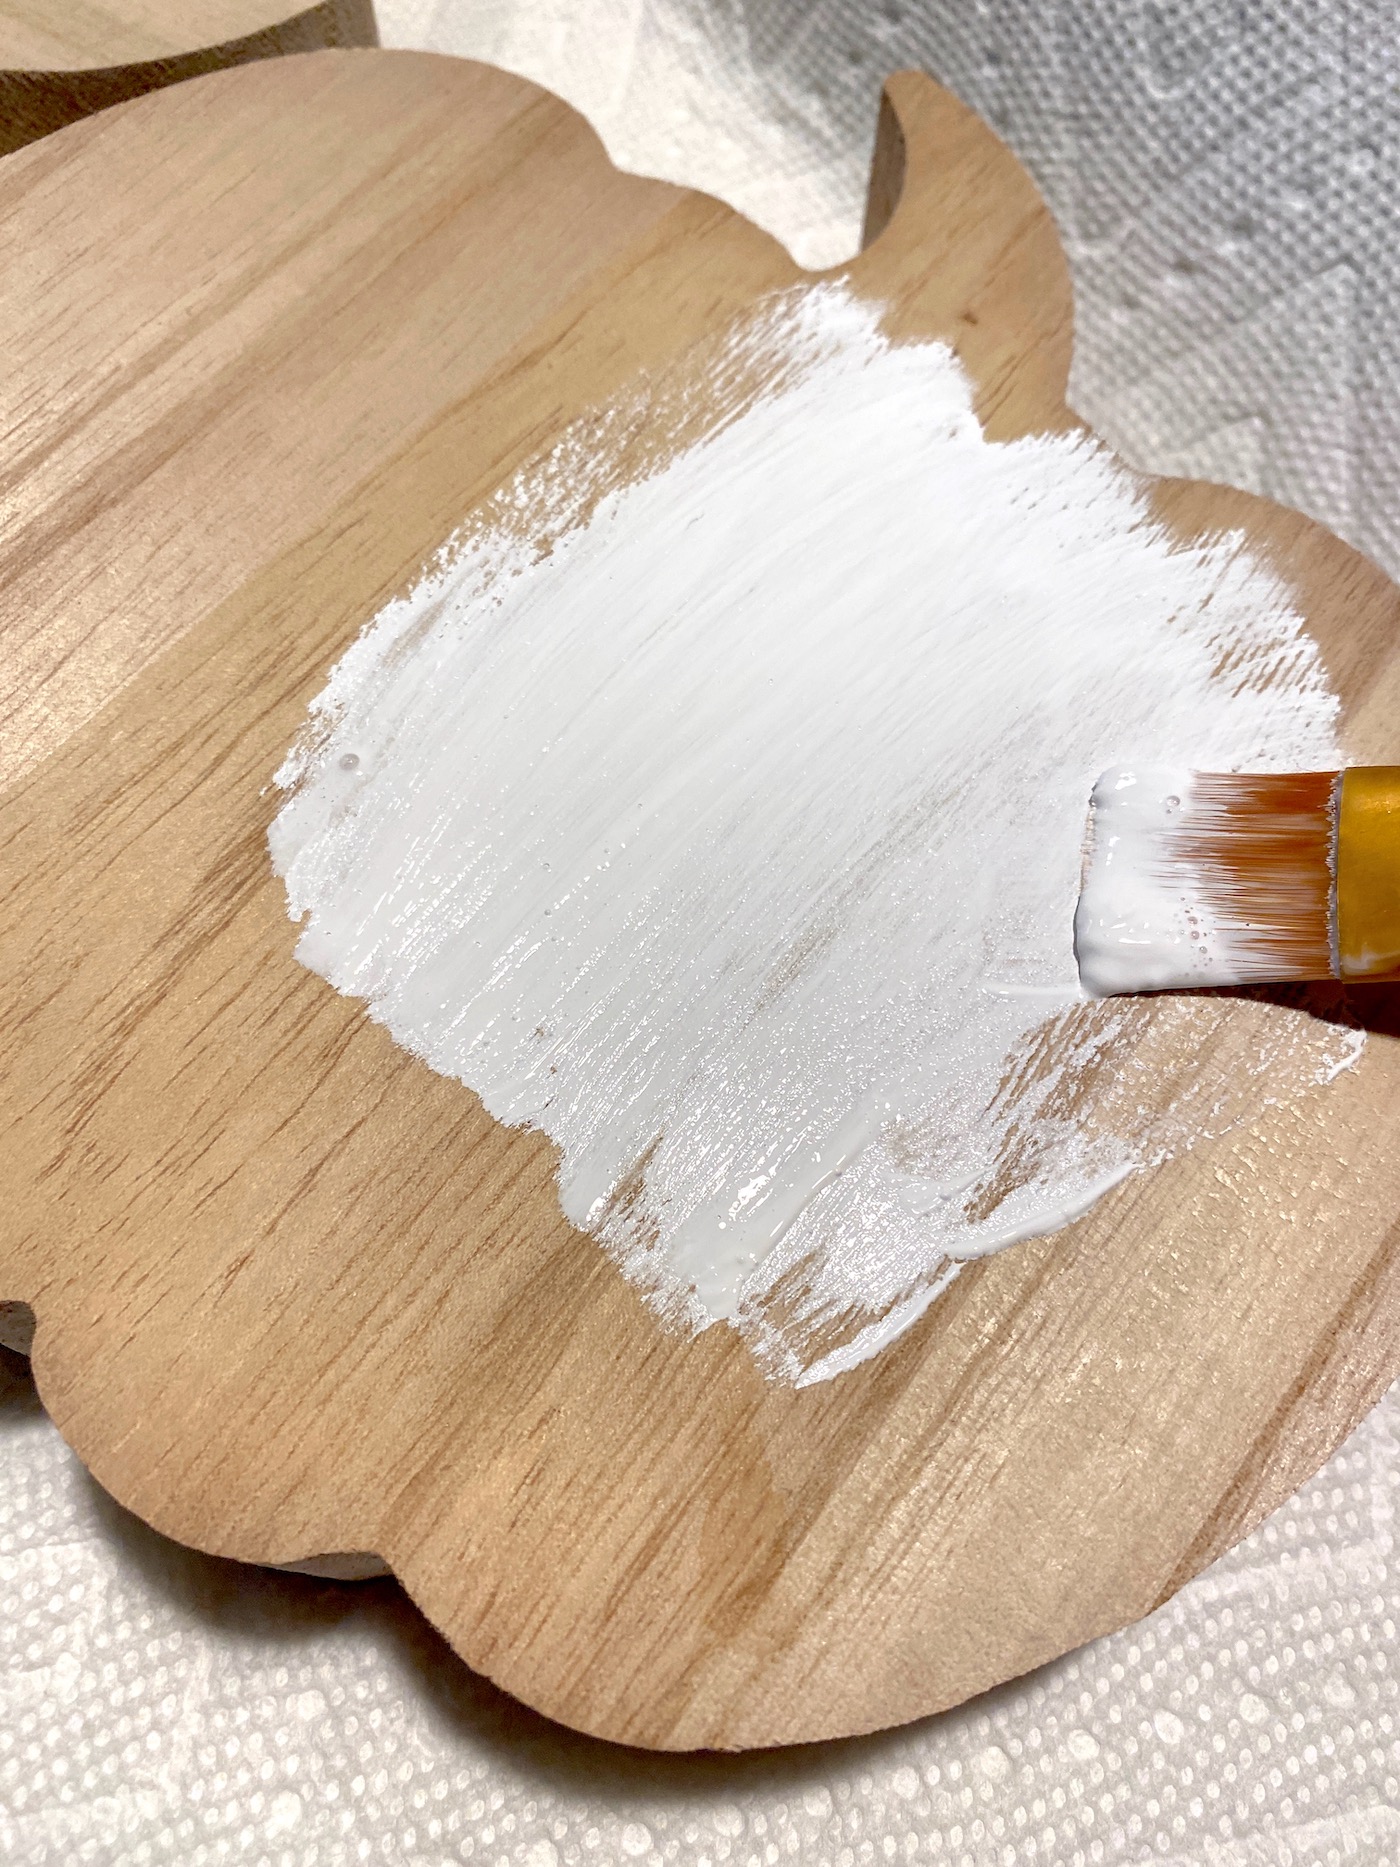 Painting a wood pumpkin with white paint